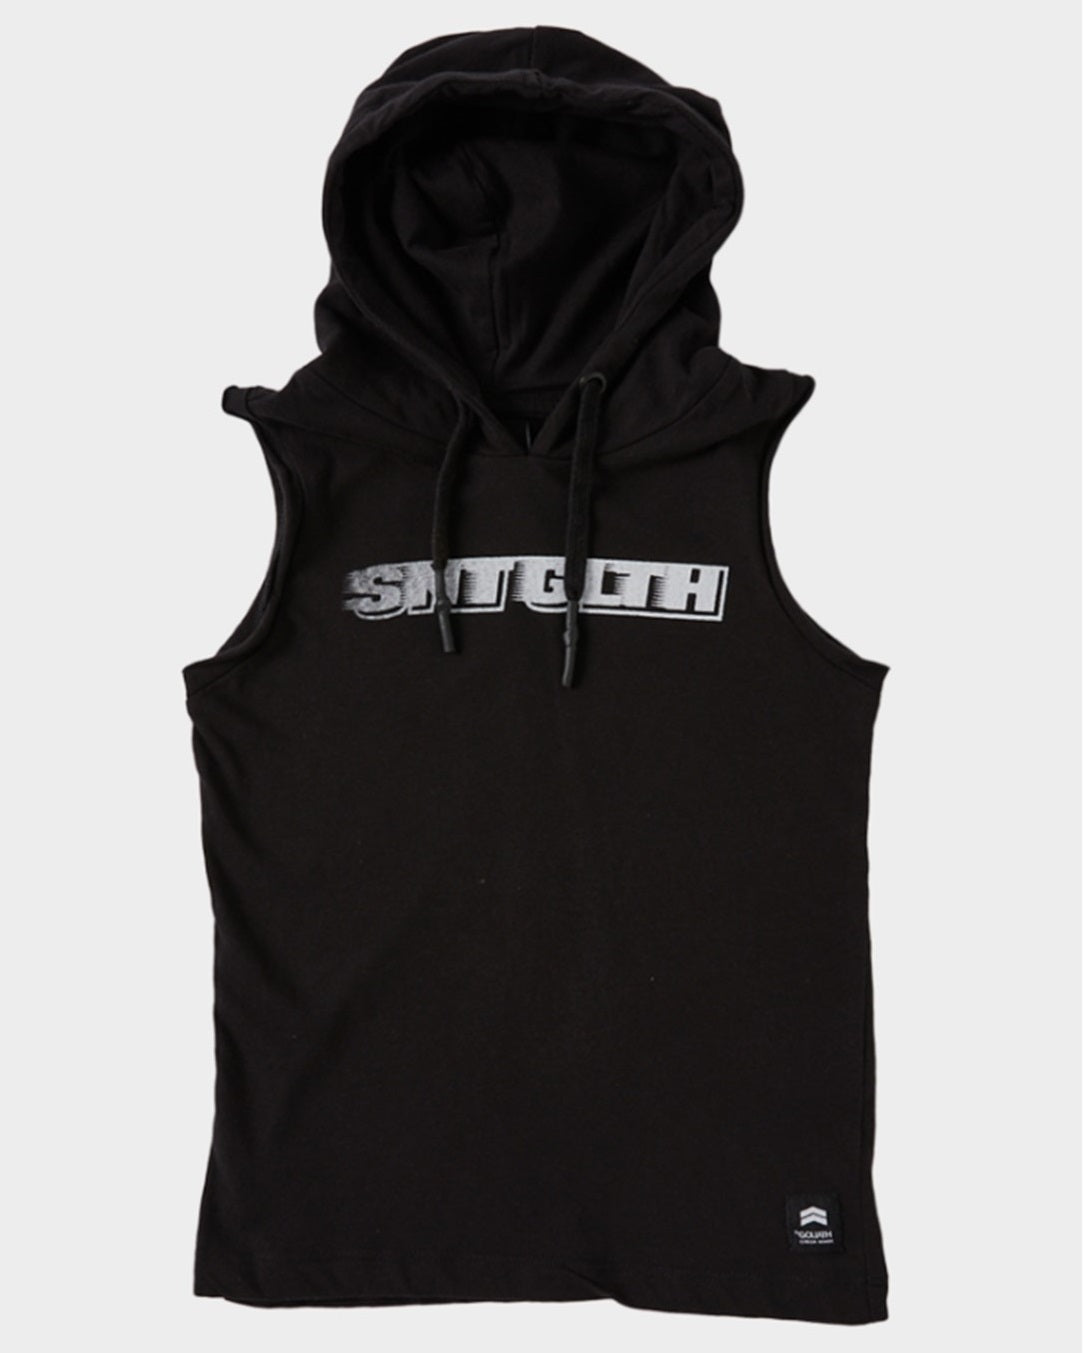 St Goliath Prime Muscle Tee - Black